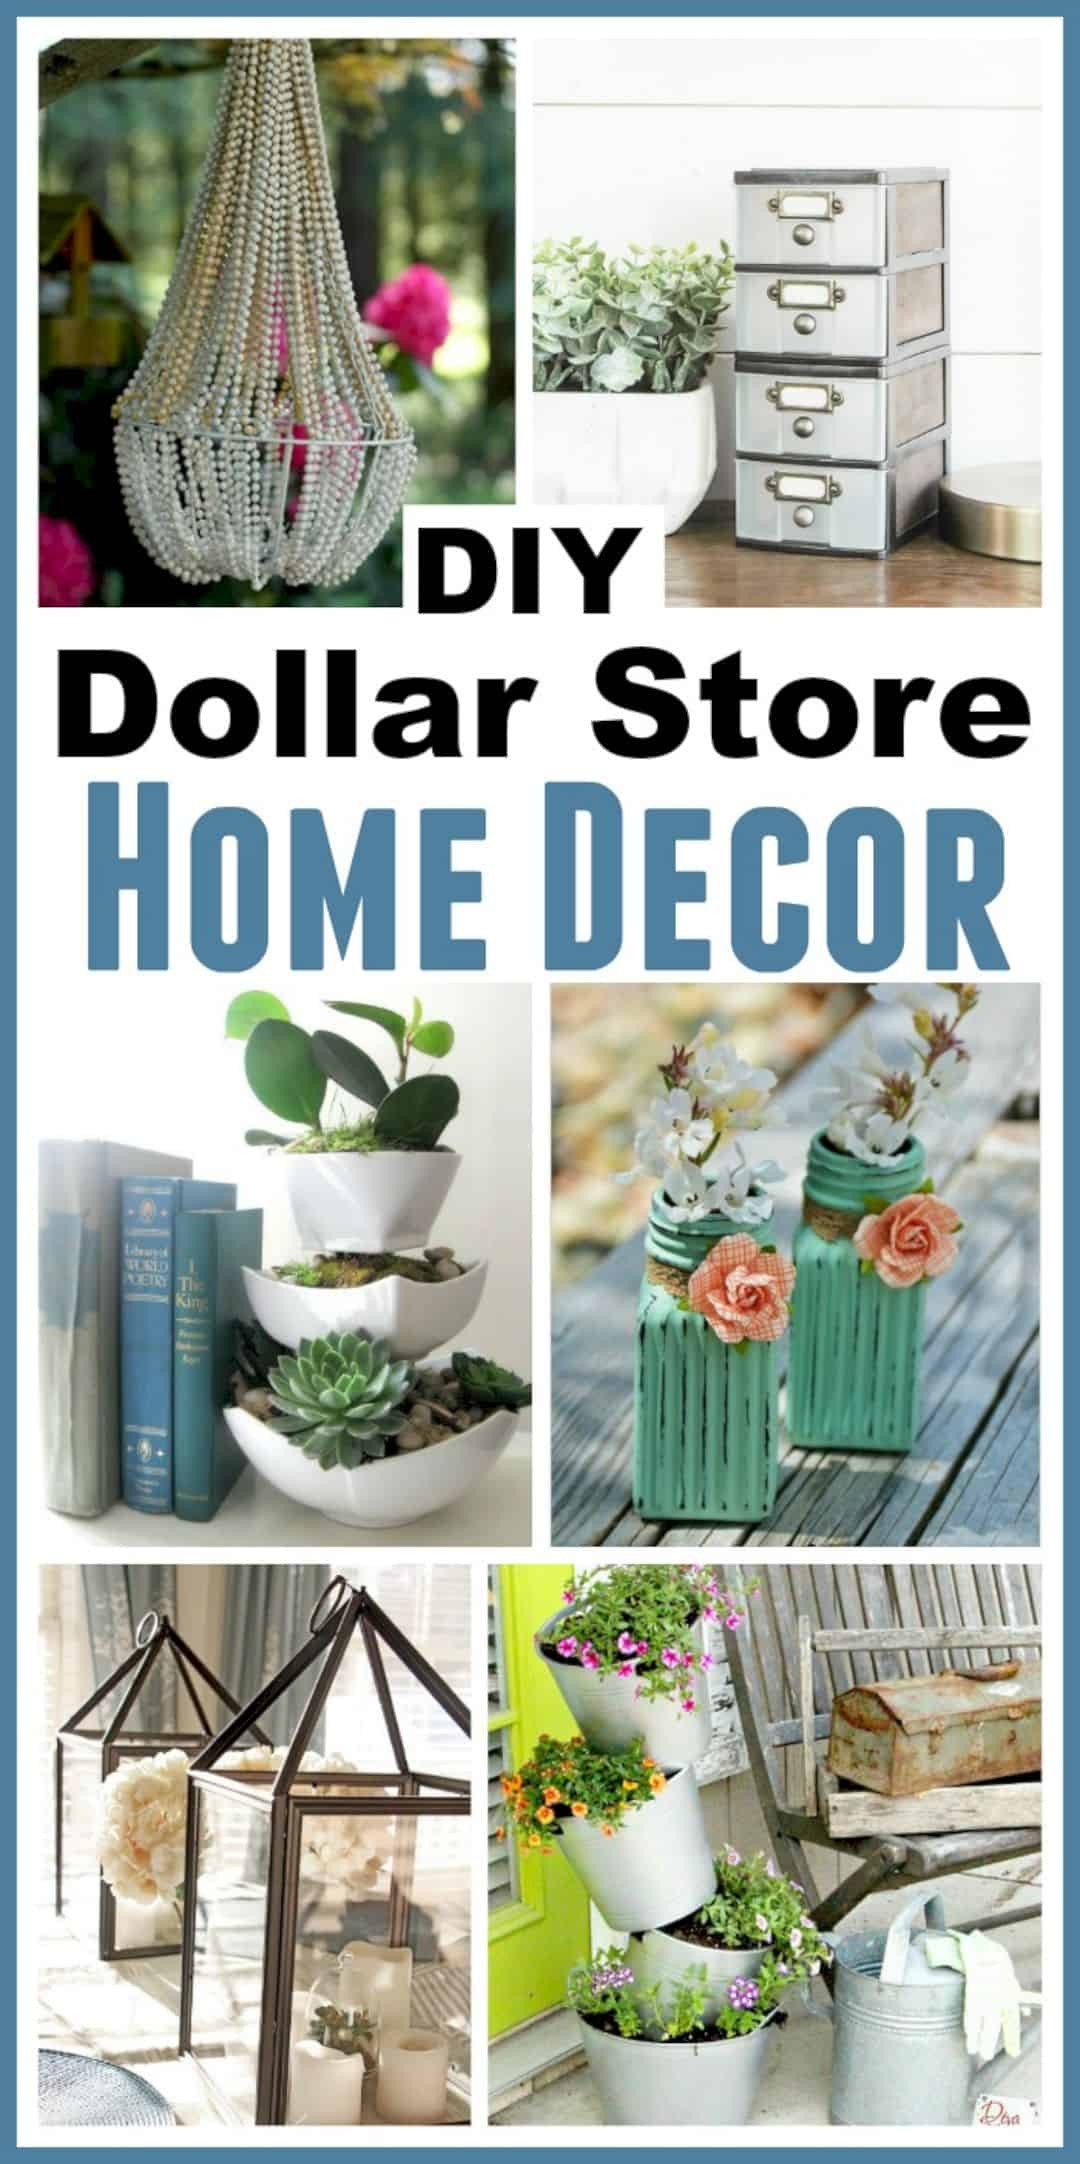 Cheap DIY Home Projects
 These 12 Bud Friendly DIY Home Decor Projects Are Worth